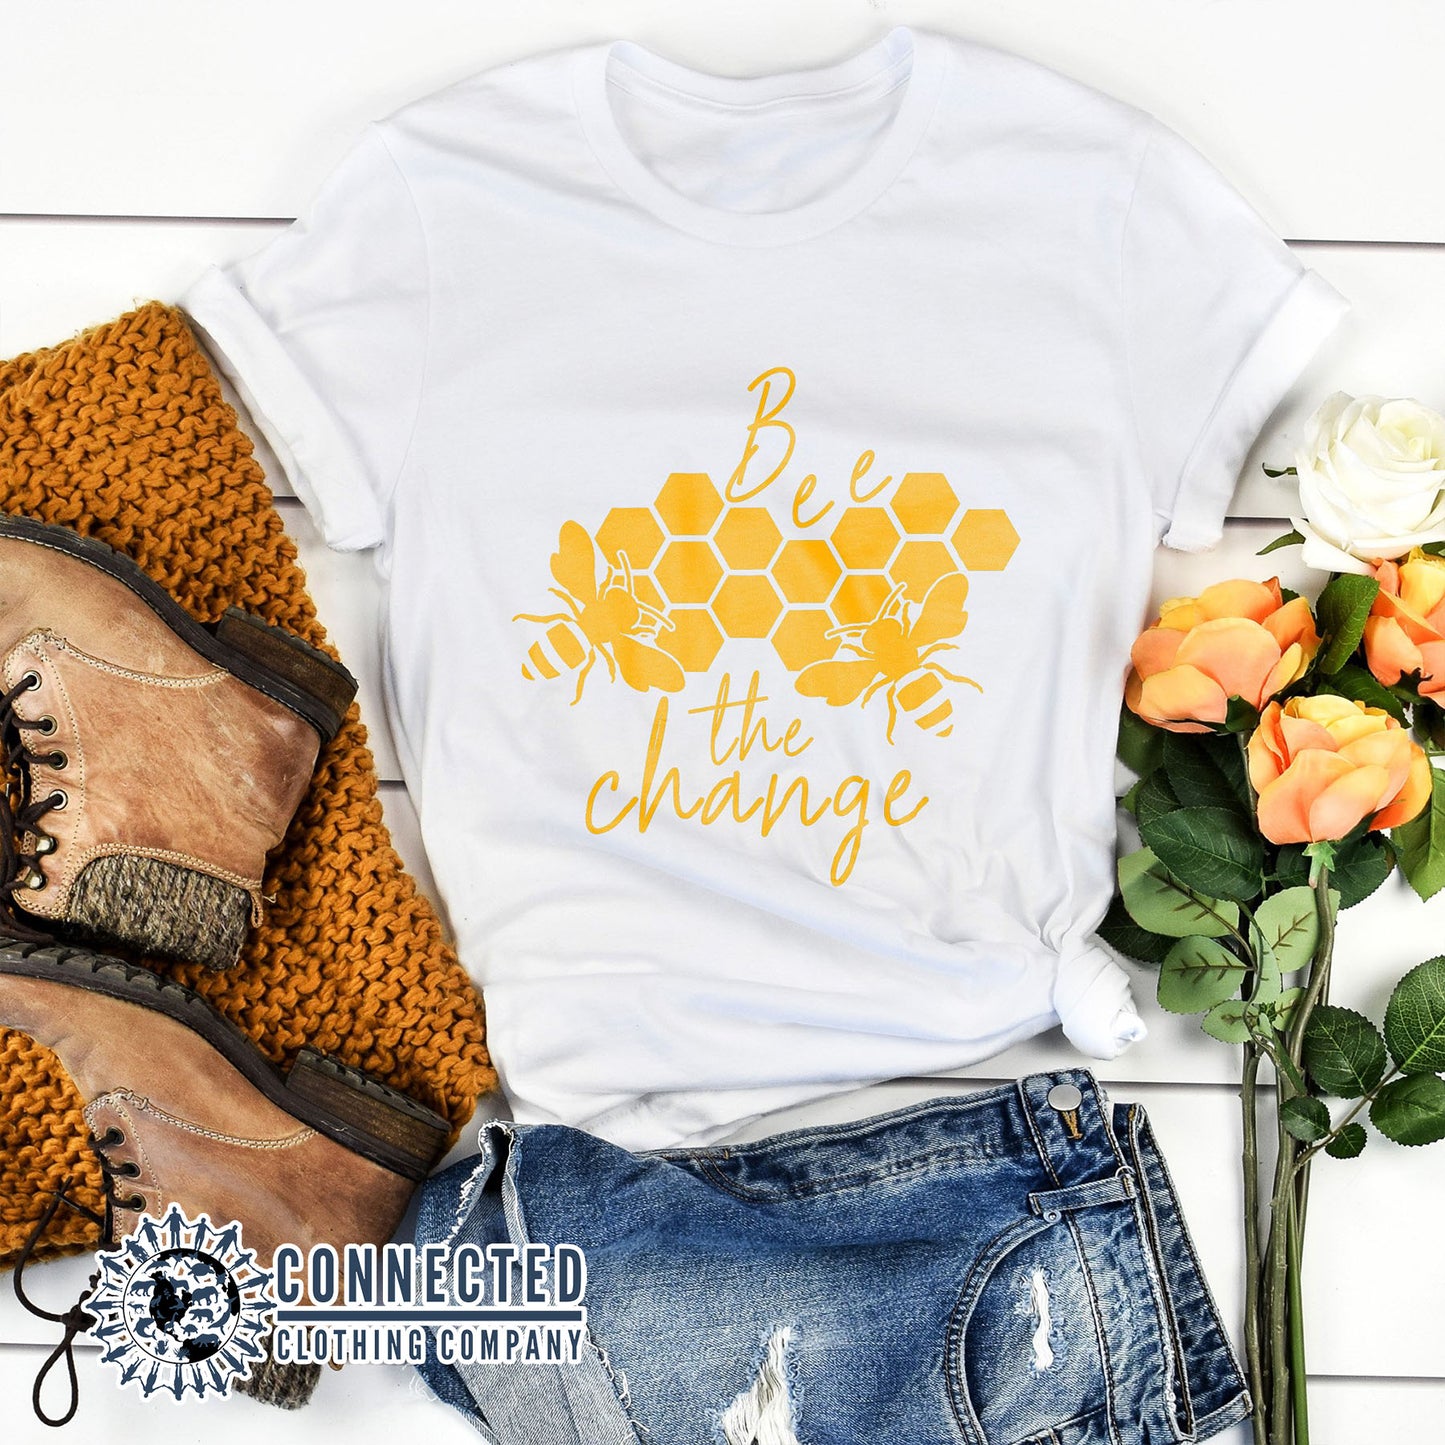 White Organic Cotton Bee The Change Short-Sleeve Tee - Connected Clothing Company - Ethically and Sustainably Made - 10% of profits donated to the Honeybee Conservancy